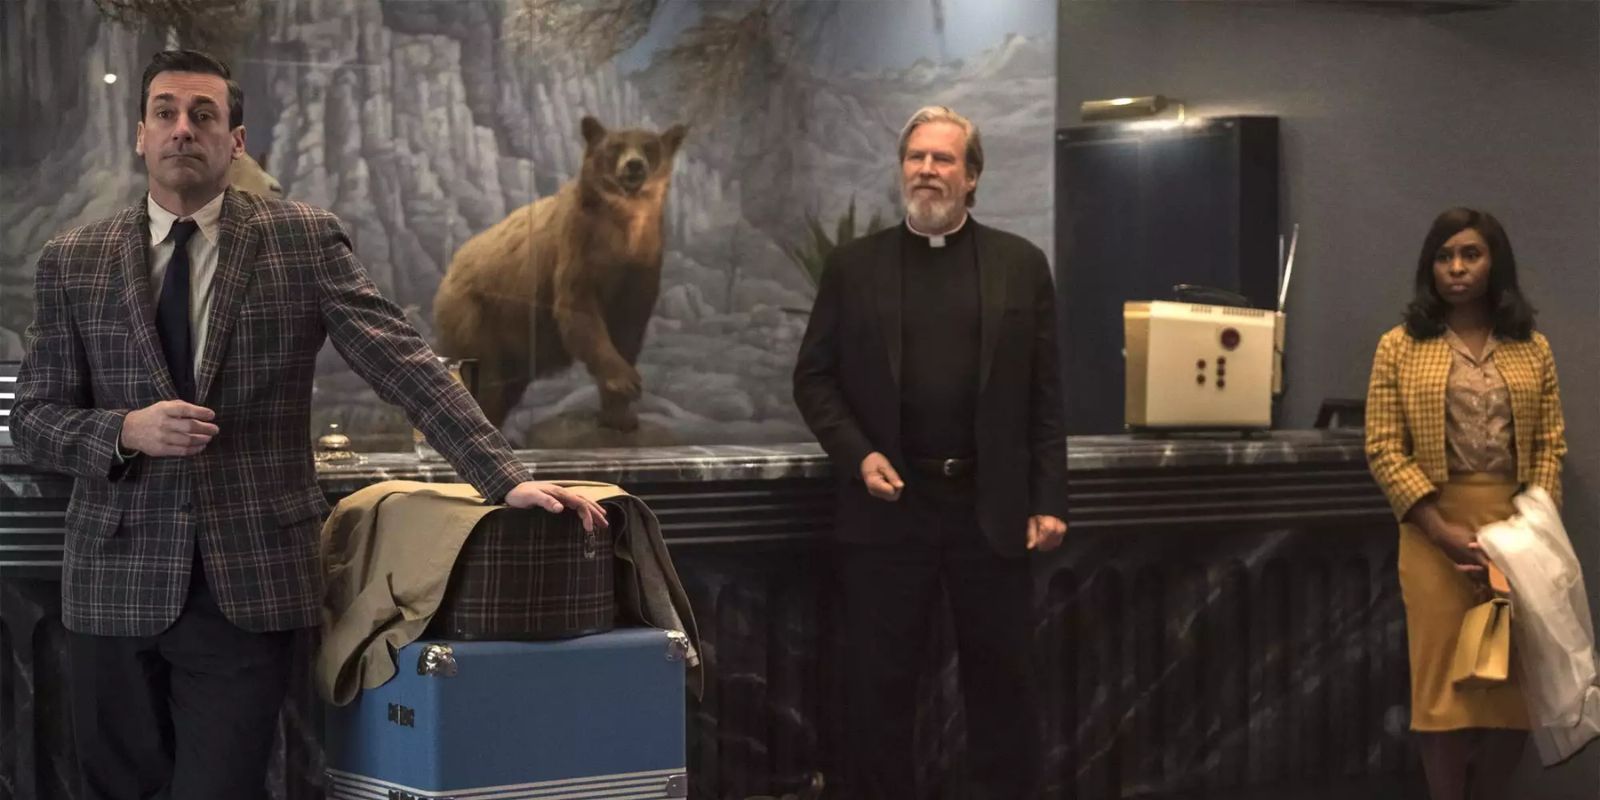 Jon Hamm, Jeff Bridges and Cynthia Erivo stand in the lobby of the El Royale with their luggage in the film Bad Times at the El Royale